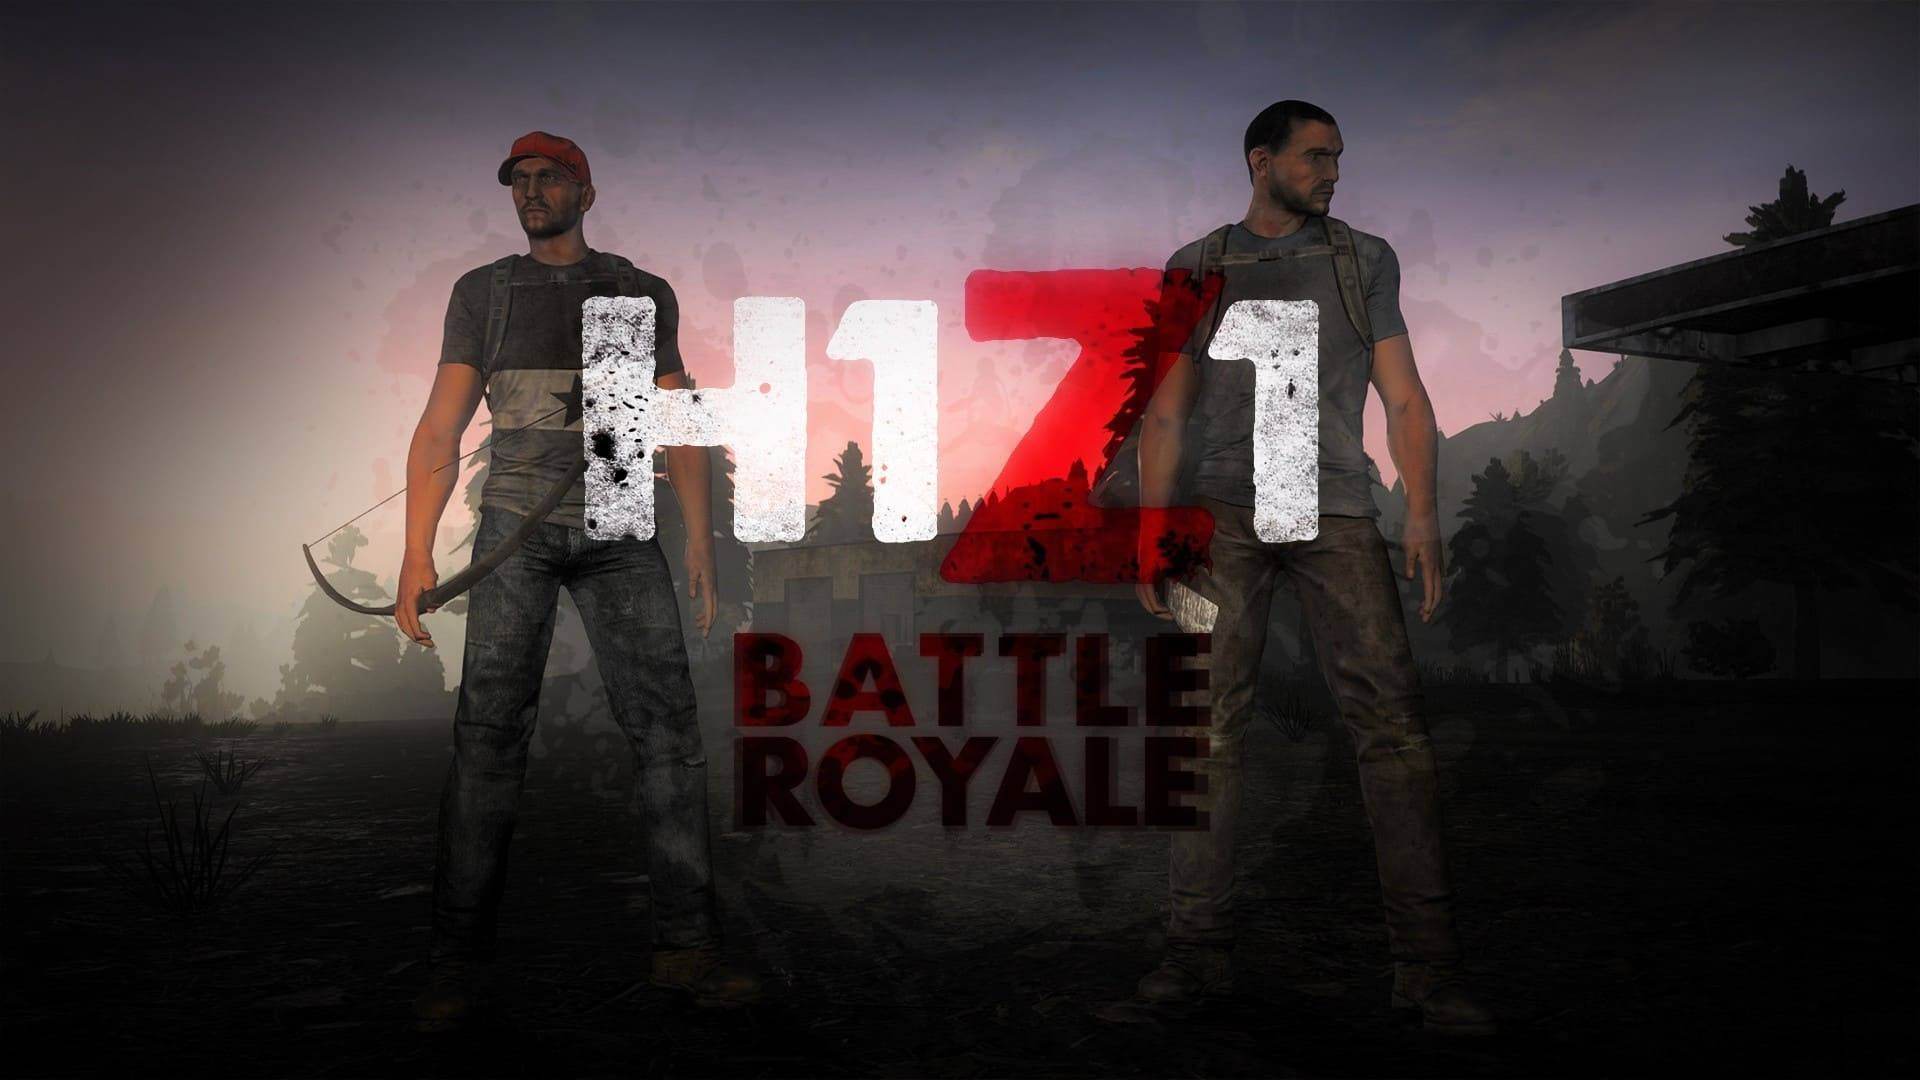 H1Z1 King of the Kill Wallpapers (93+ images)